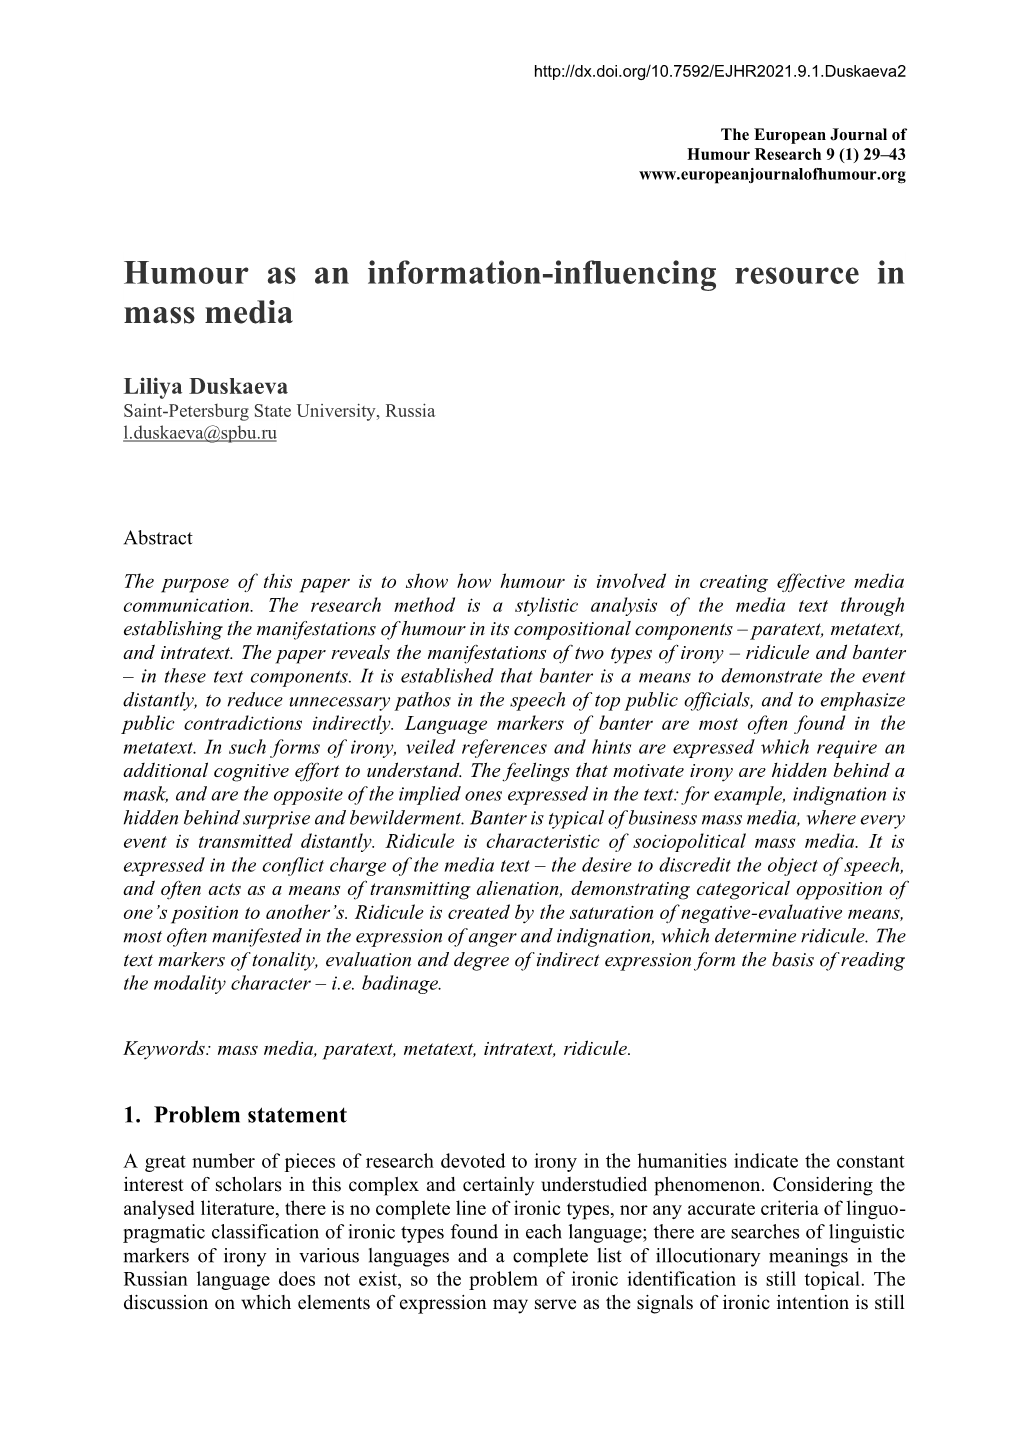 Humour As an Information-Influencing Resource in Mass Media